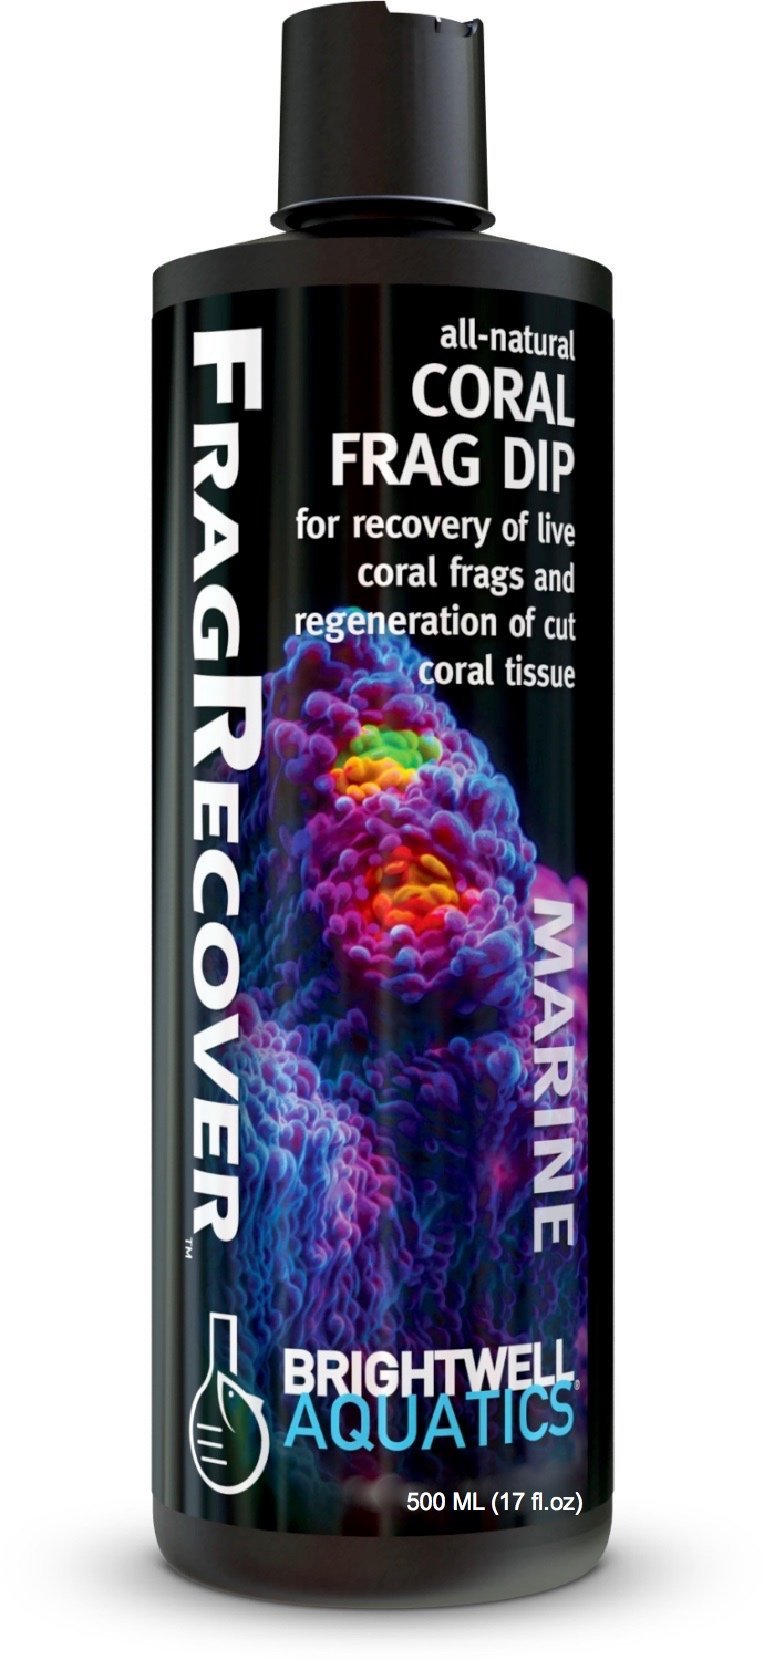 [Australia] - Brightwell Aquatics Frag Recover - Natural Herbal Coral Dip  to Prevent Infections and Recover Tissue in Fragging 500-ML 